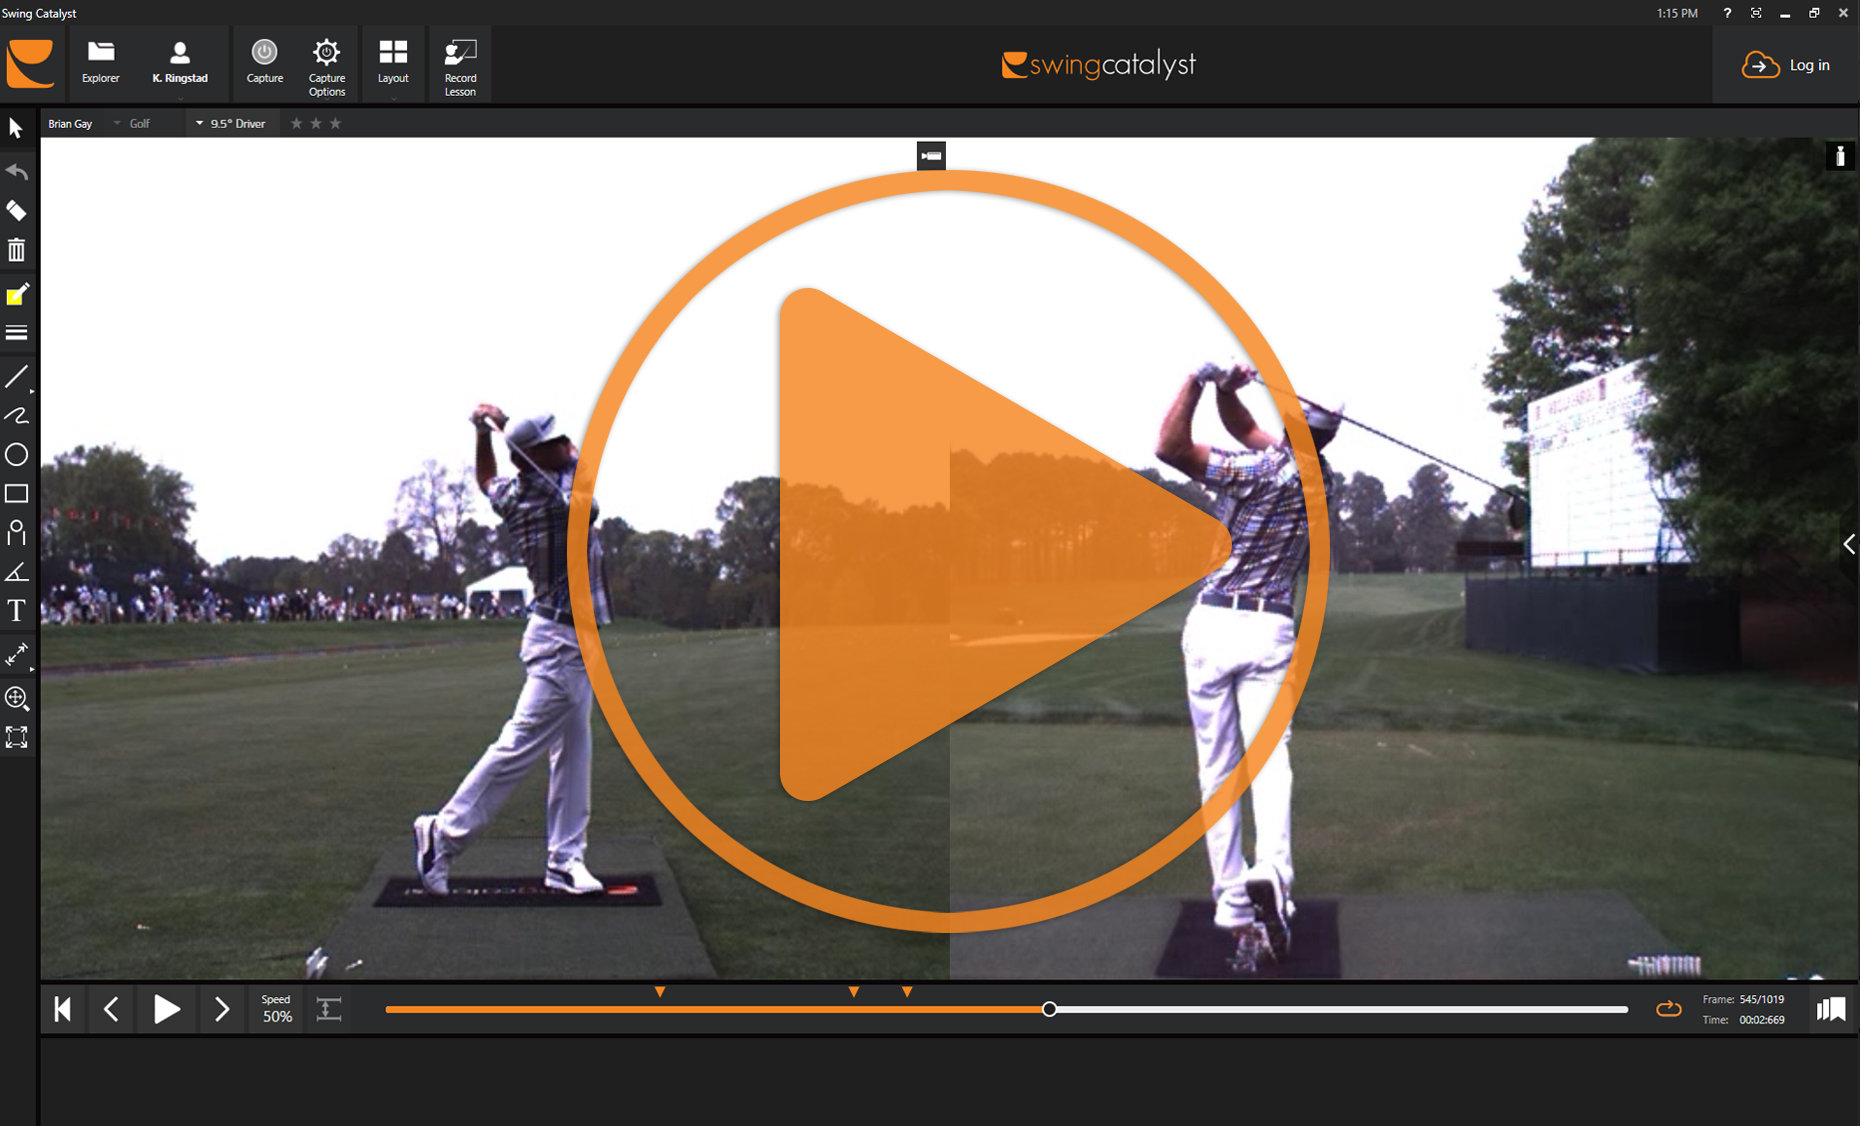 How practicing in slow-motion can help improve your swing